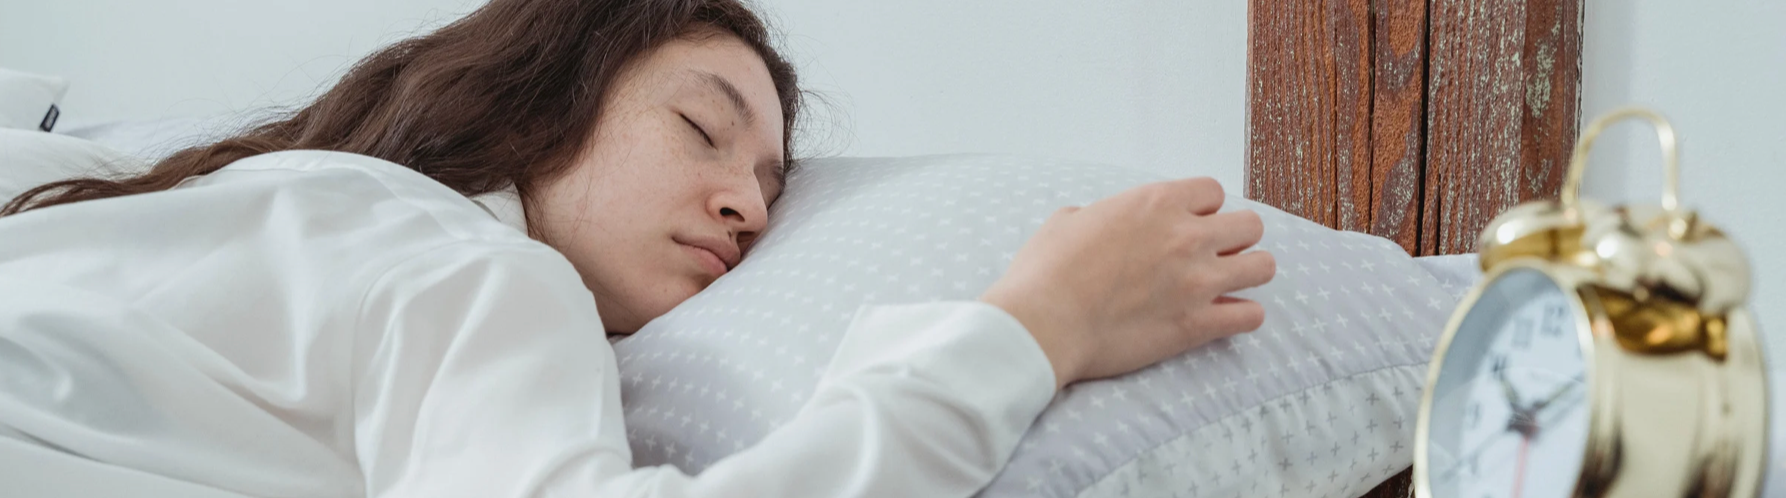 Guest Blog by The Sleep Council: How to fall asleep...and stay asleep!